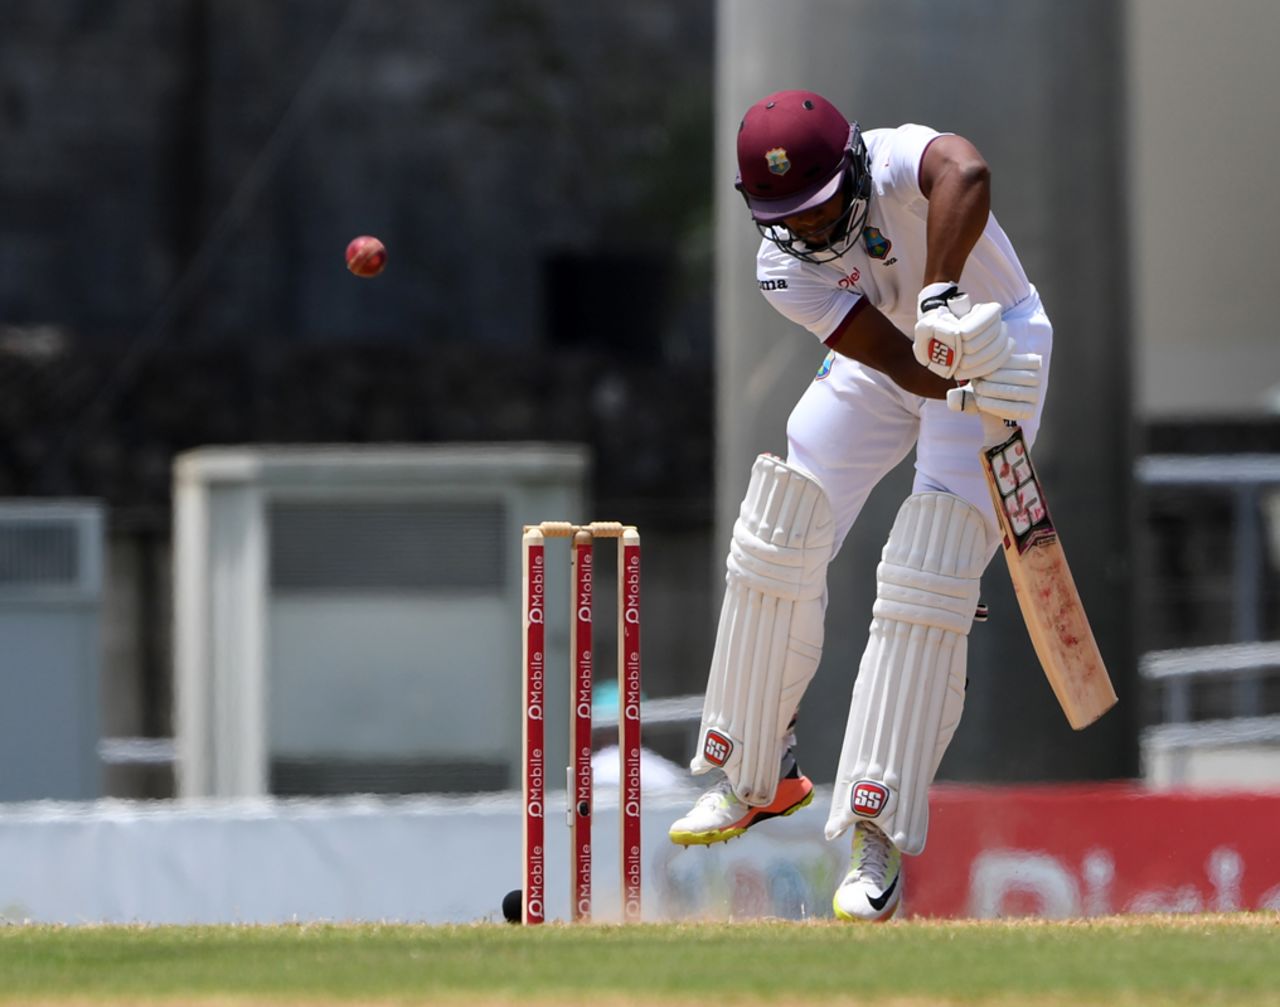 Shai Hope hops to defend an awkward delivery, West Indies v Pakistan, 3rd Test, Roseau, 3rd day, May 12, 2017